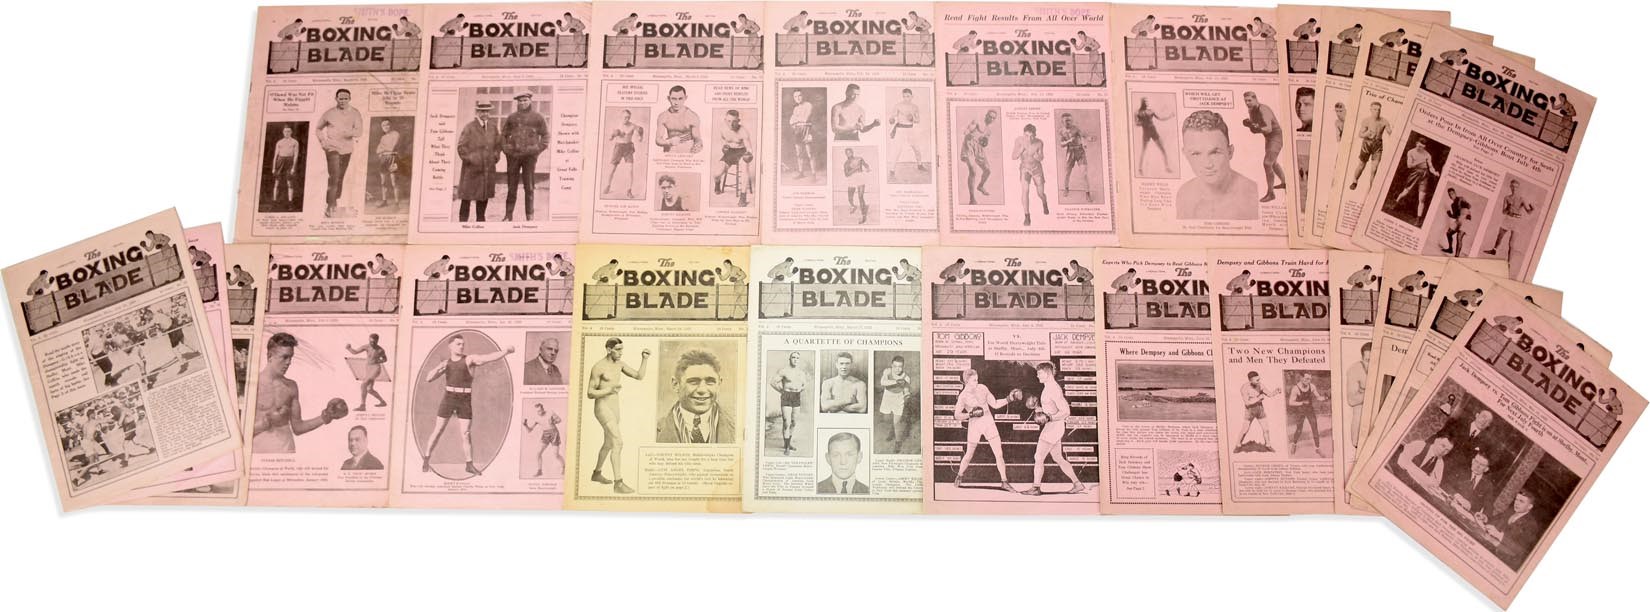 - 1923 The Boxing Blade Magazine Collection (30)